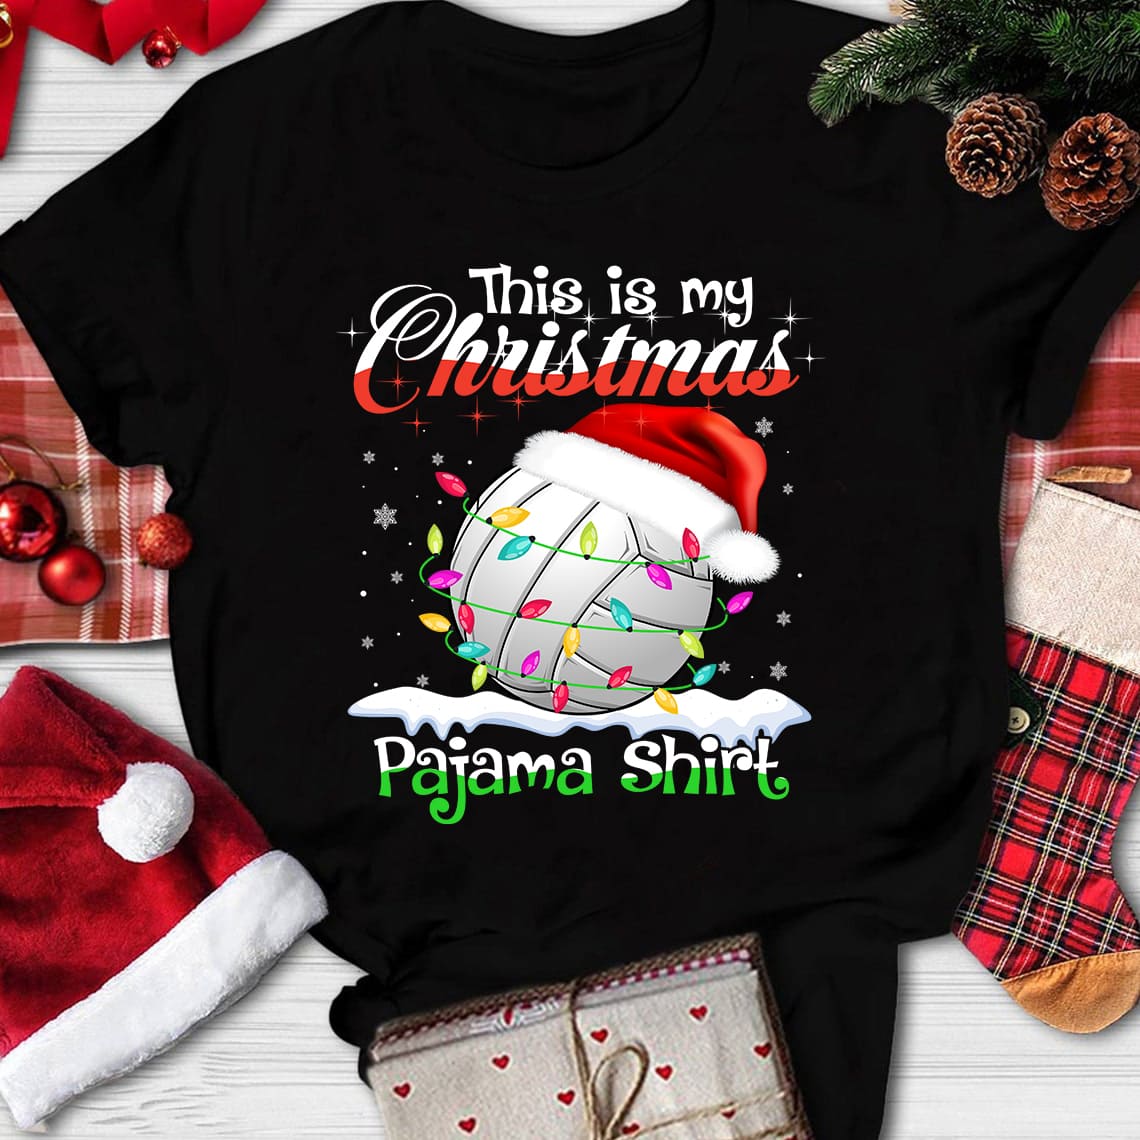 This is my Christmas pajama shirt - Volleyball player gift, Santa Claus's hat